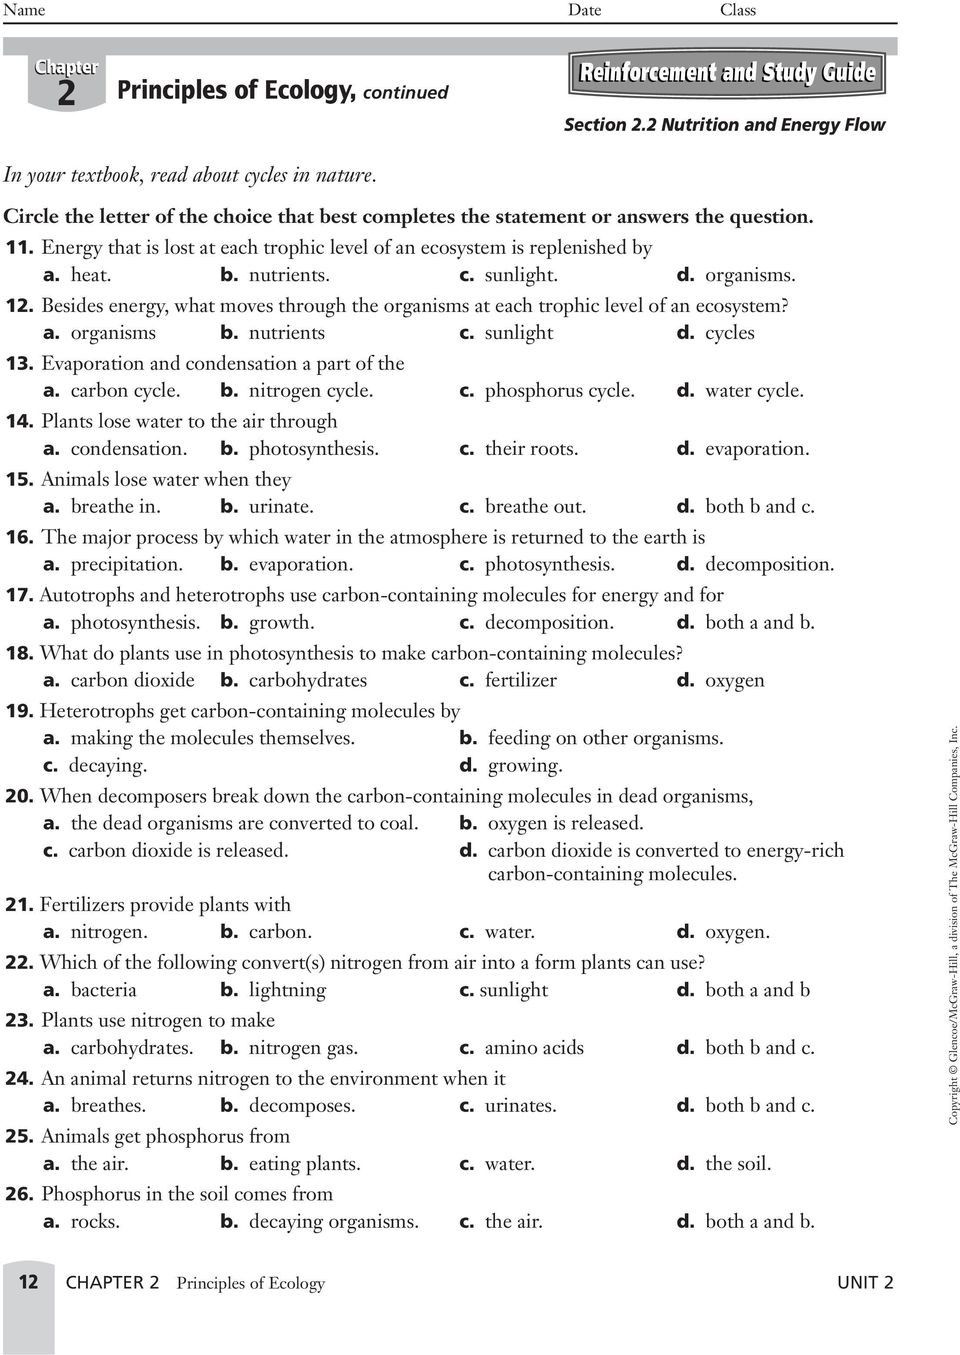 Ecology Review Worksheet 1 Unit 2 Resources Ecology Pdf Free Download